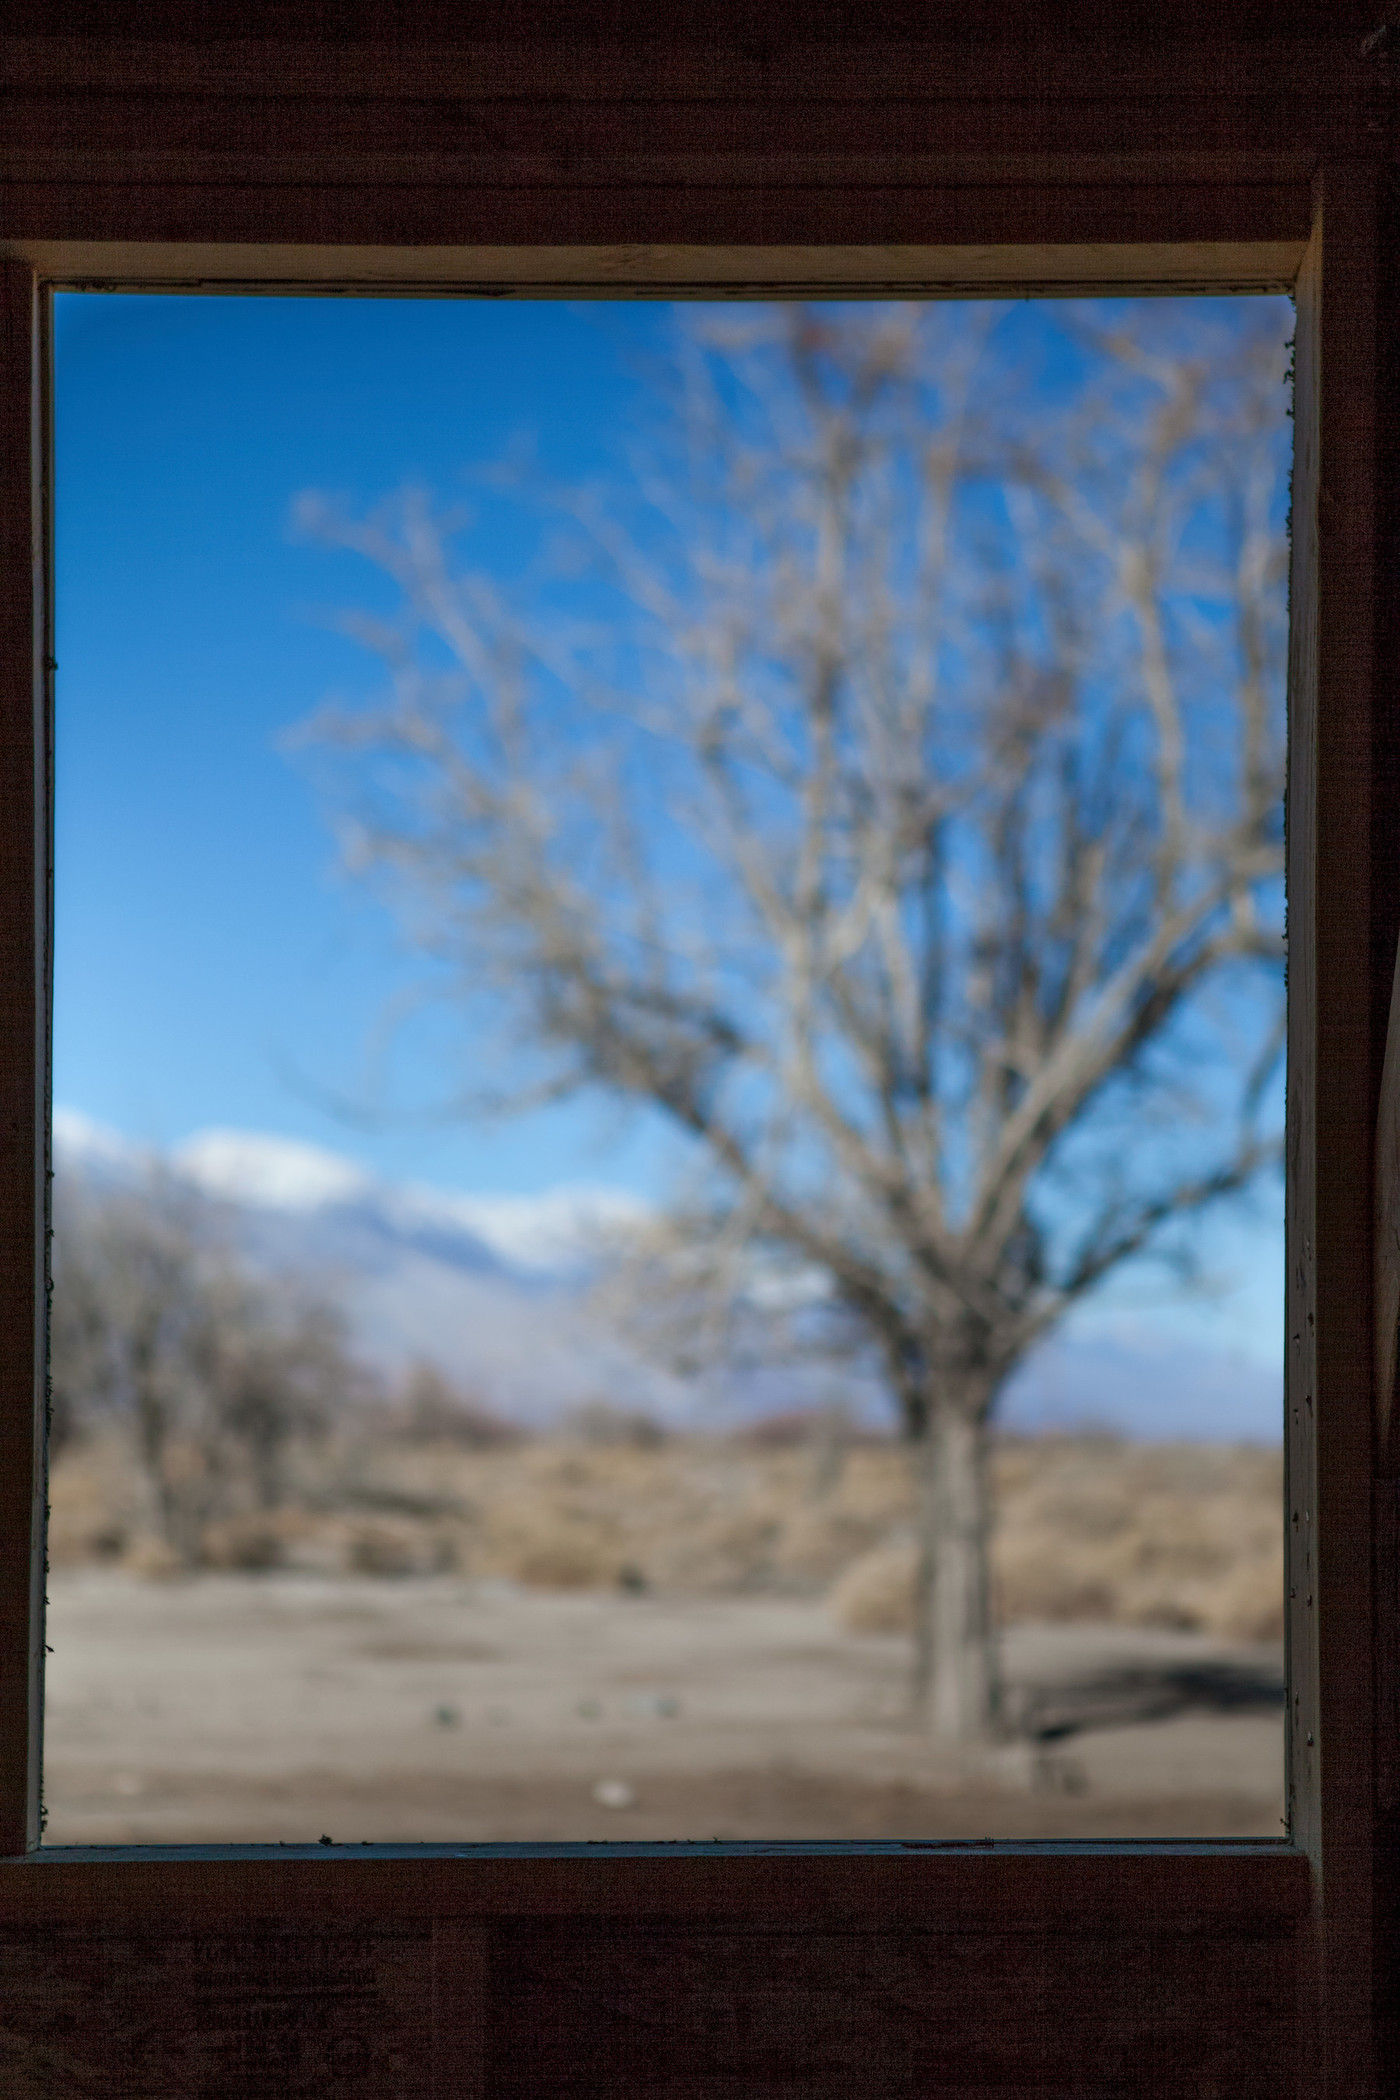 Christina Fernandez, Toyo (Manzanar), 2016, Los Angeles County Museum of Art, purchased with funds provided by Sharyn and Bruce Charnas, Dr. Janet Mohle-Boetani, and the Ralph M. Parsons Fund, © Christina Fernandez